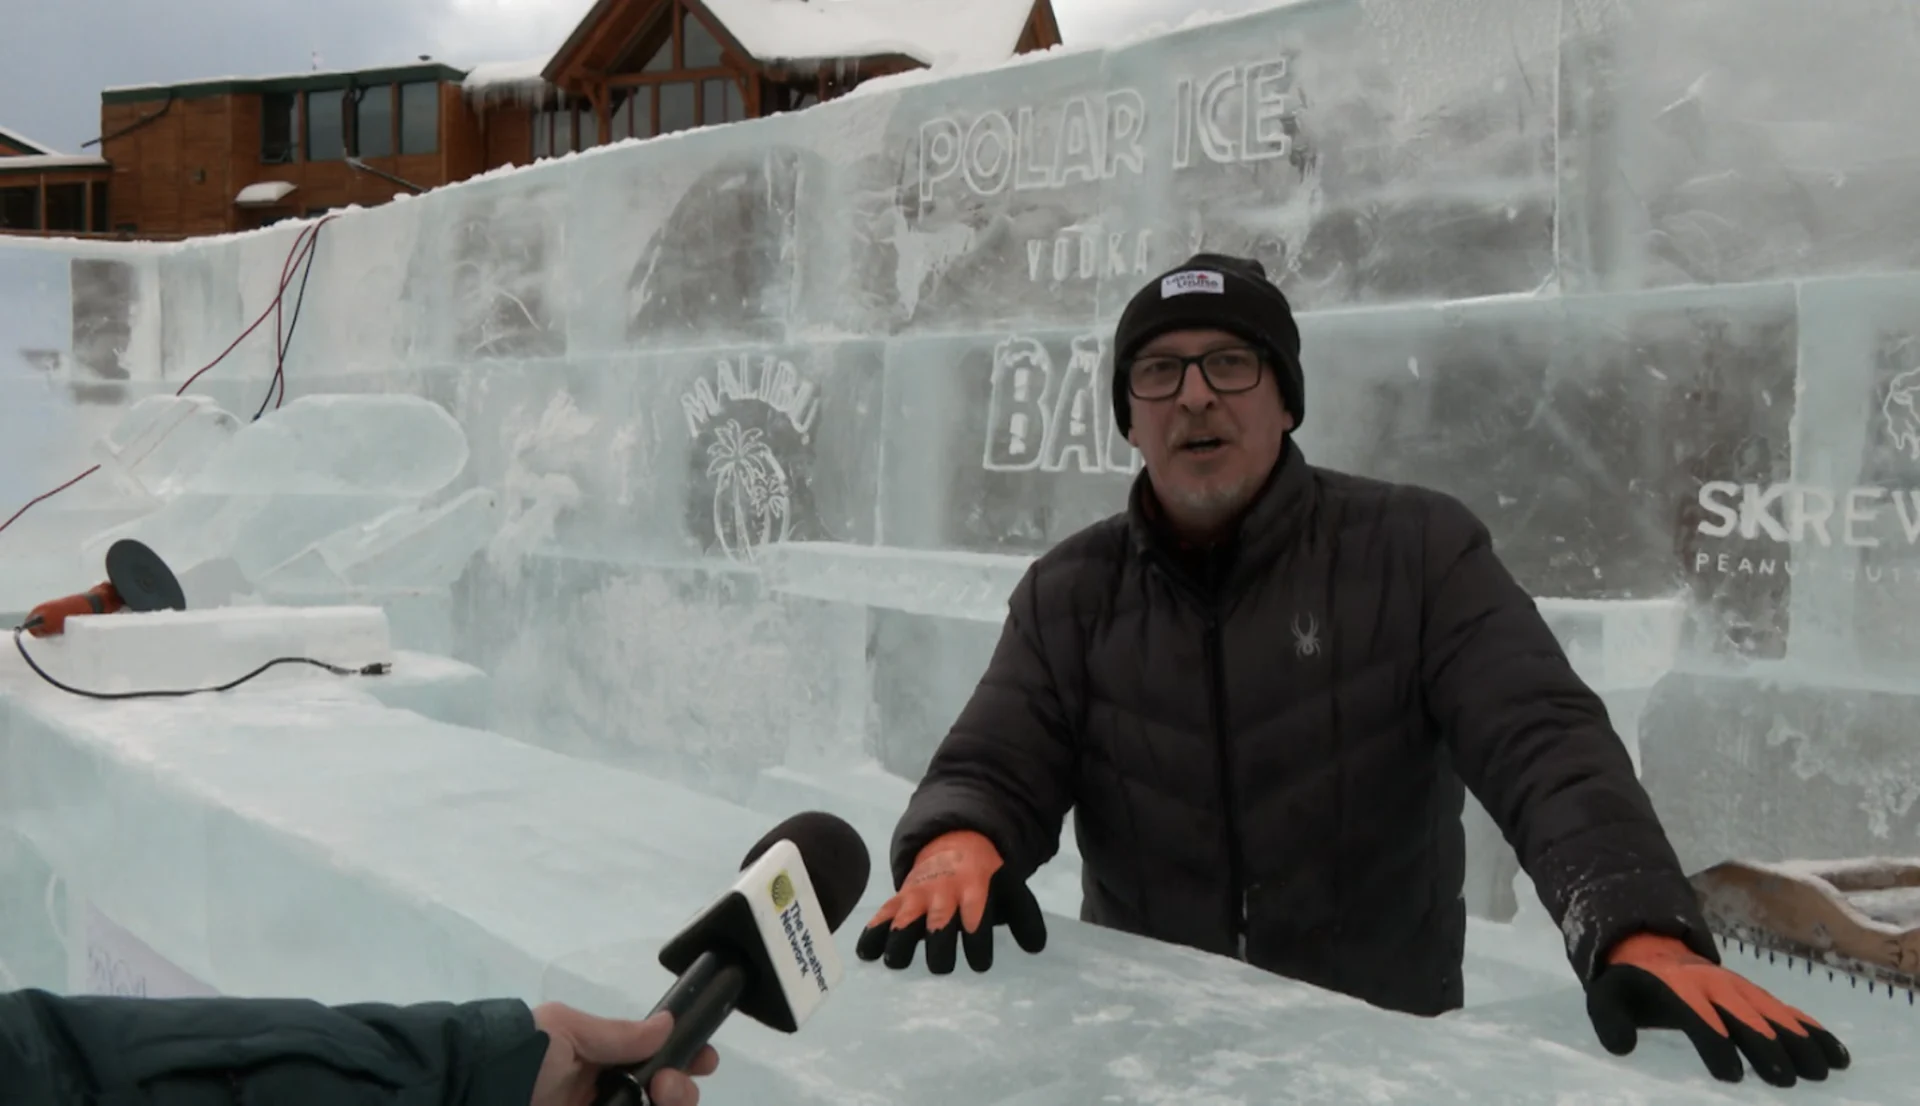 Connor O'Donovan: Lake Louise Ski resort Hospitality Director Bradley Froehlich, who has been ice carving since he was a teenager, helped lead the build. 